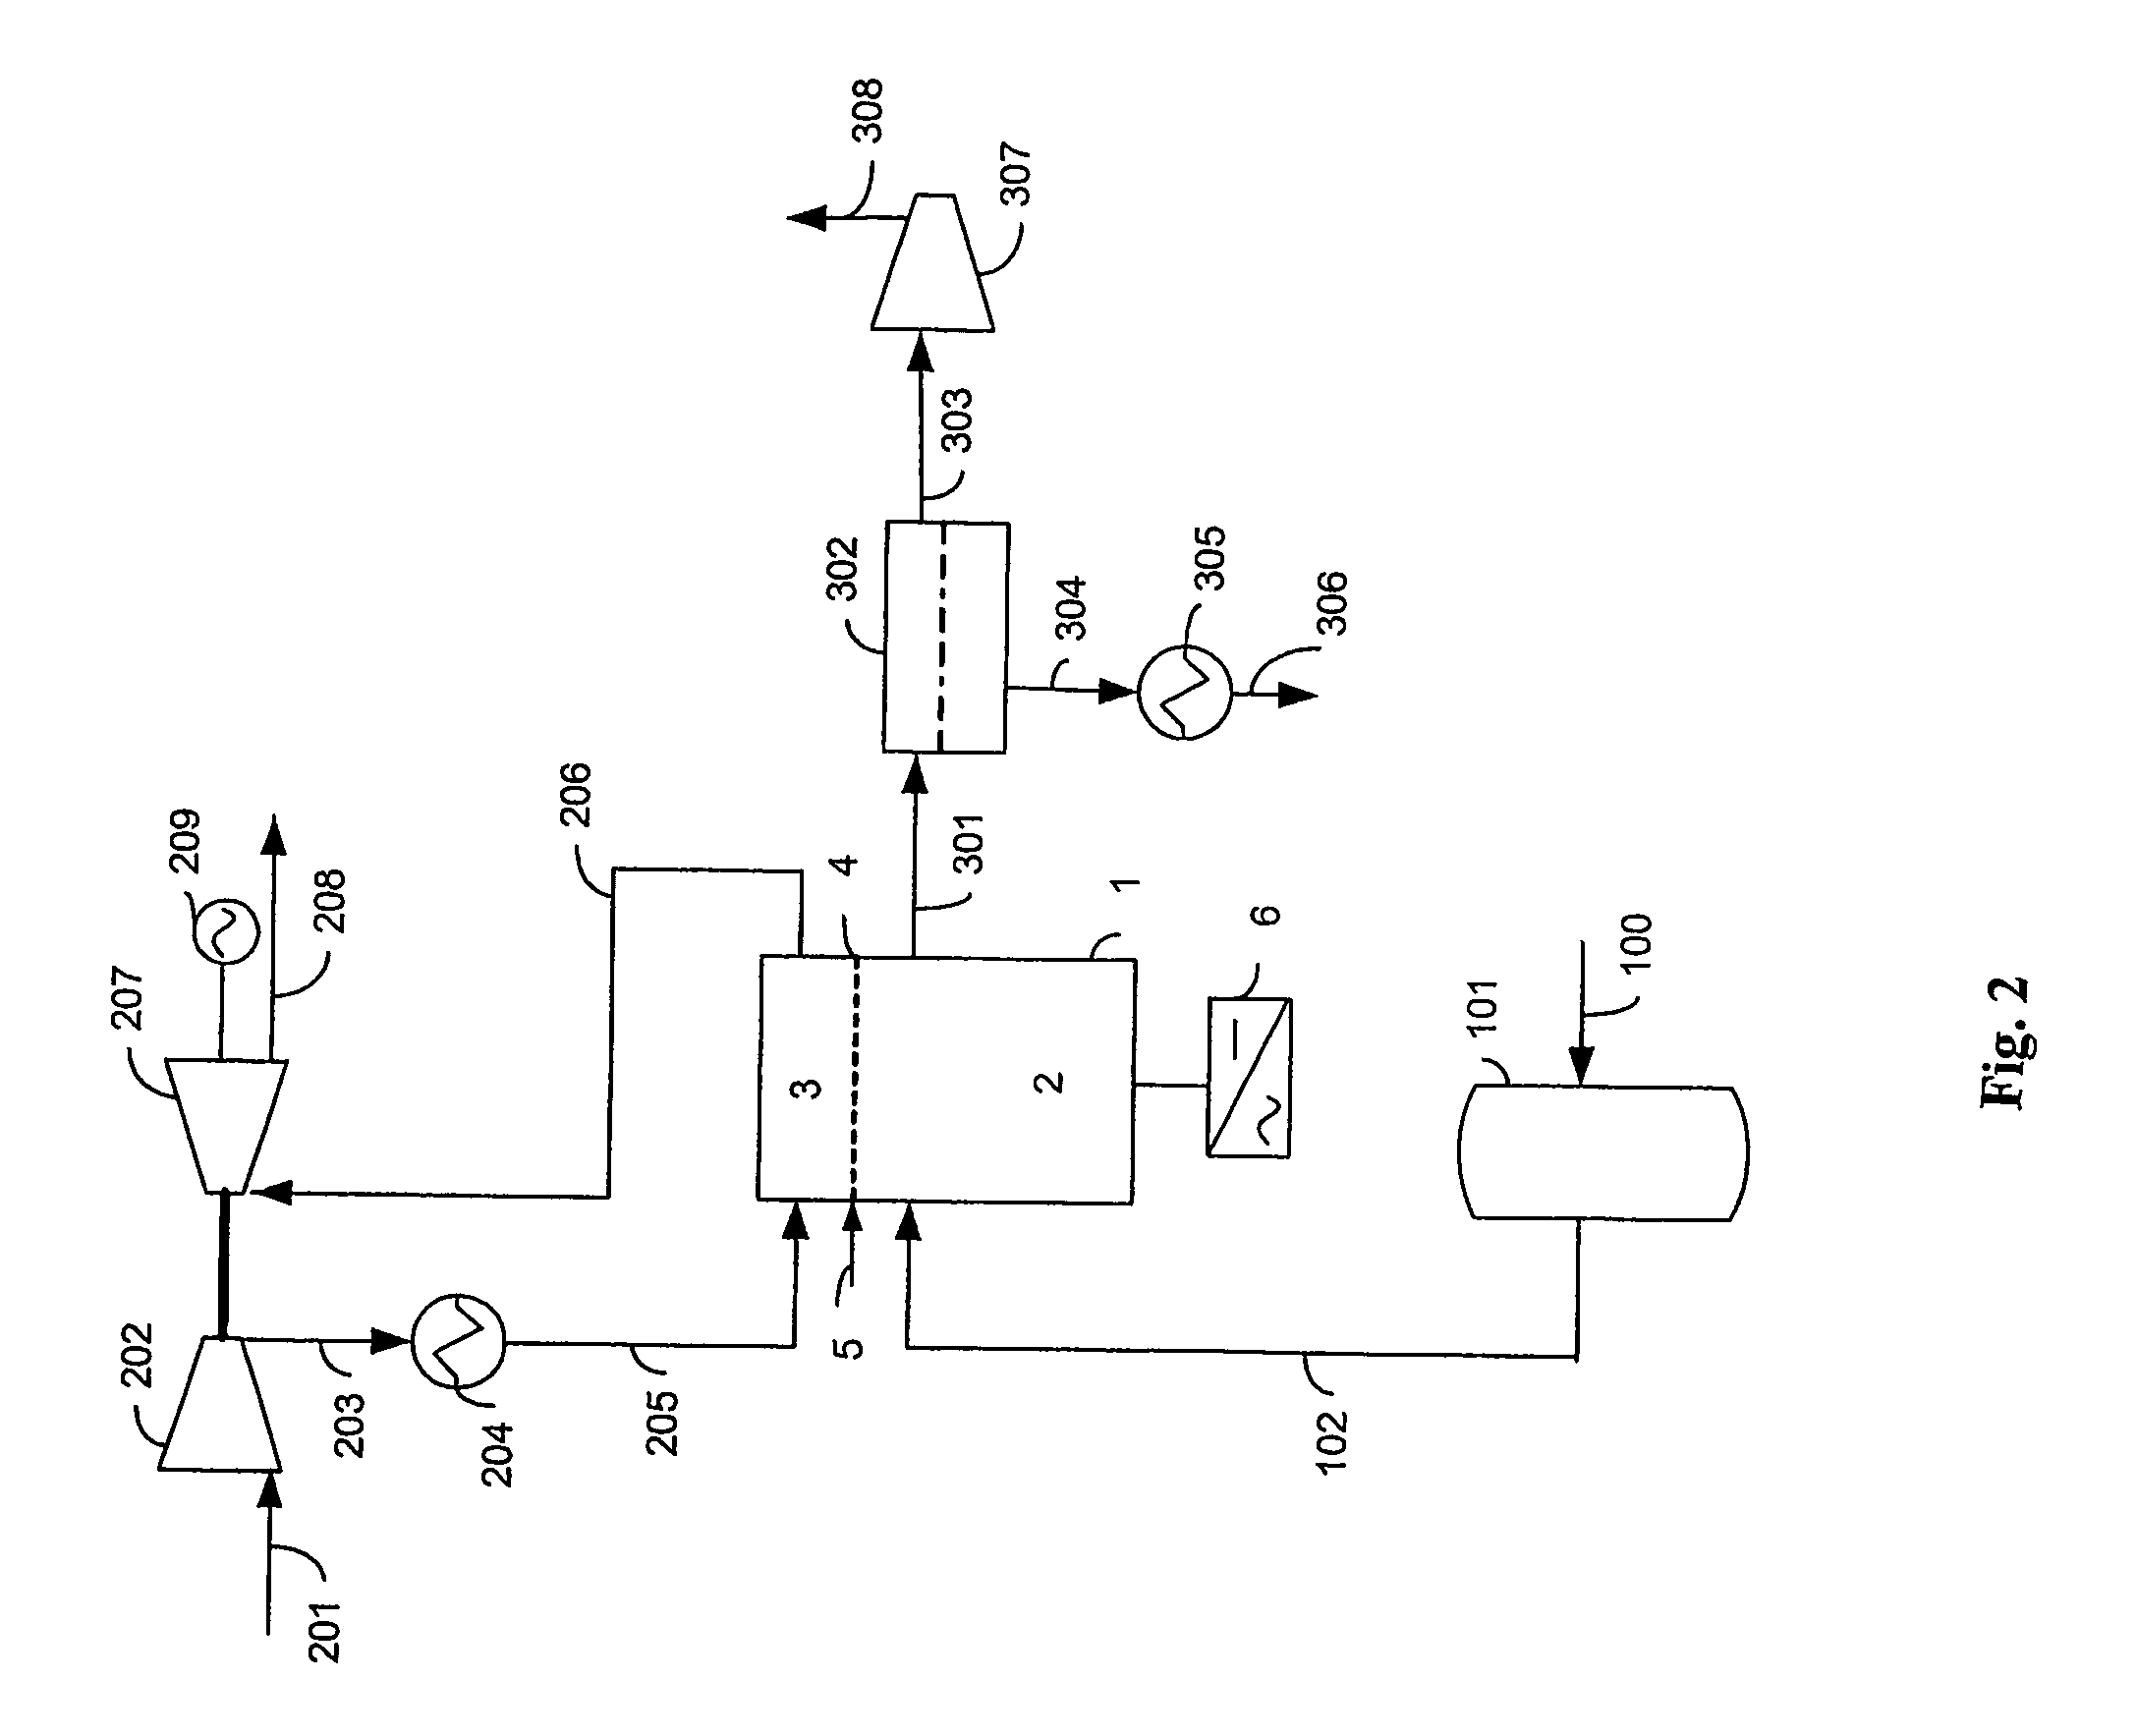 Method for exhaust gas treatment in a solid oxide fuel cell power plant